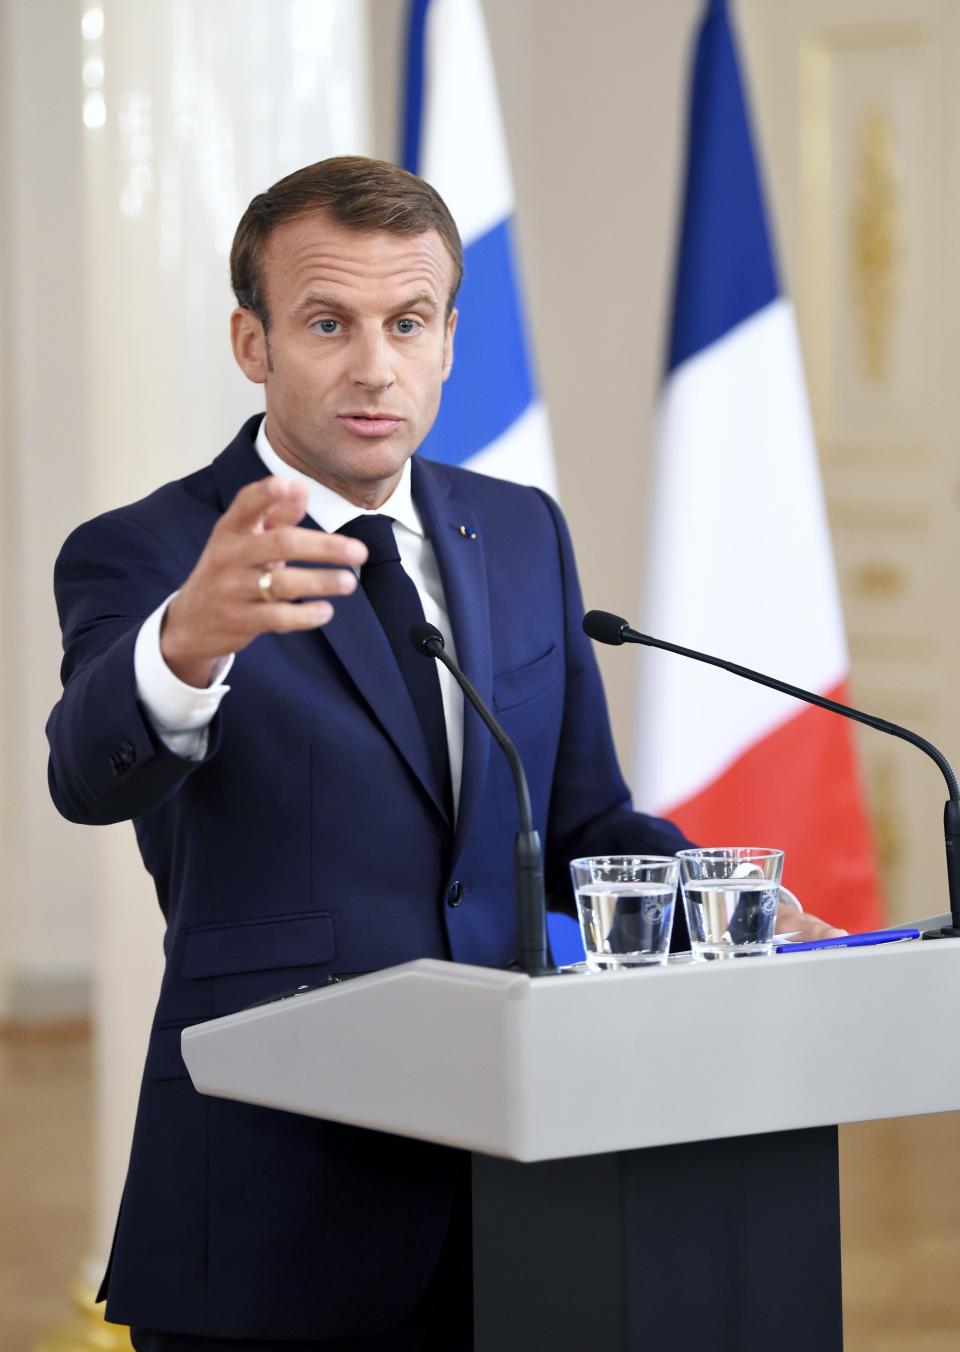 French President Emmanuel Macron attends a joint press conference with Finland President Sauli Niinisto at Presidential Palace in Helsinki, Finland, Thursday Aug. 30, 2018. President Macron is in Finland on a two-day official visit. (Antti Aimo-Koivisto/Lehtikuva via AP)